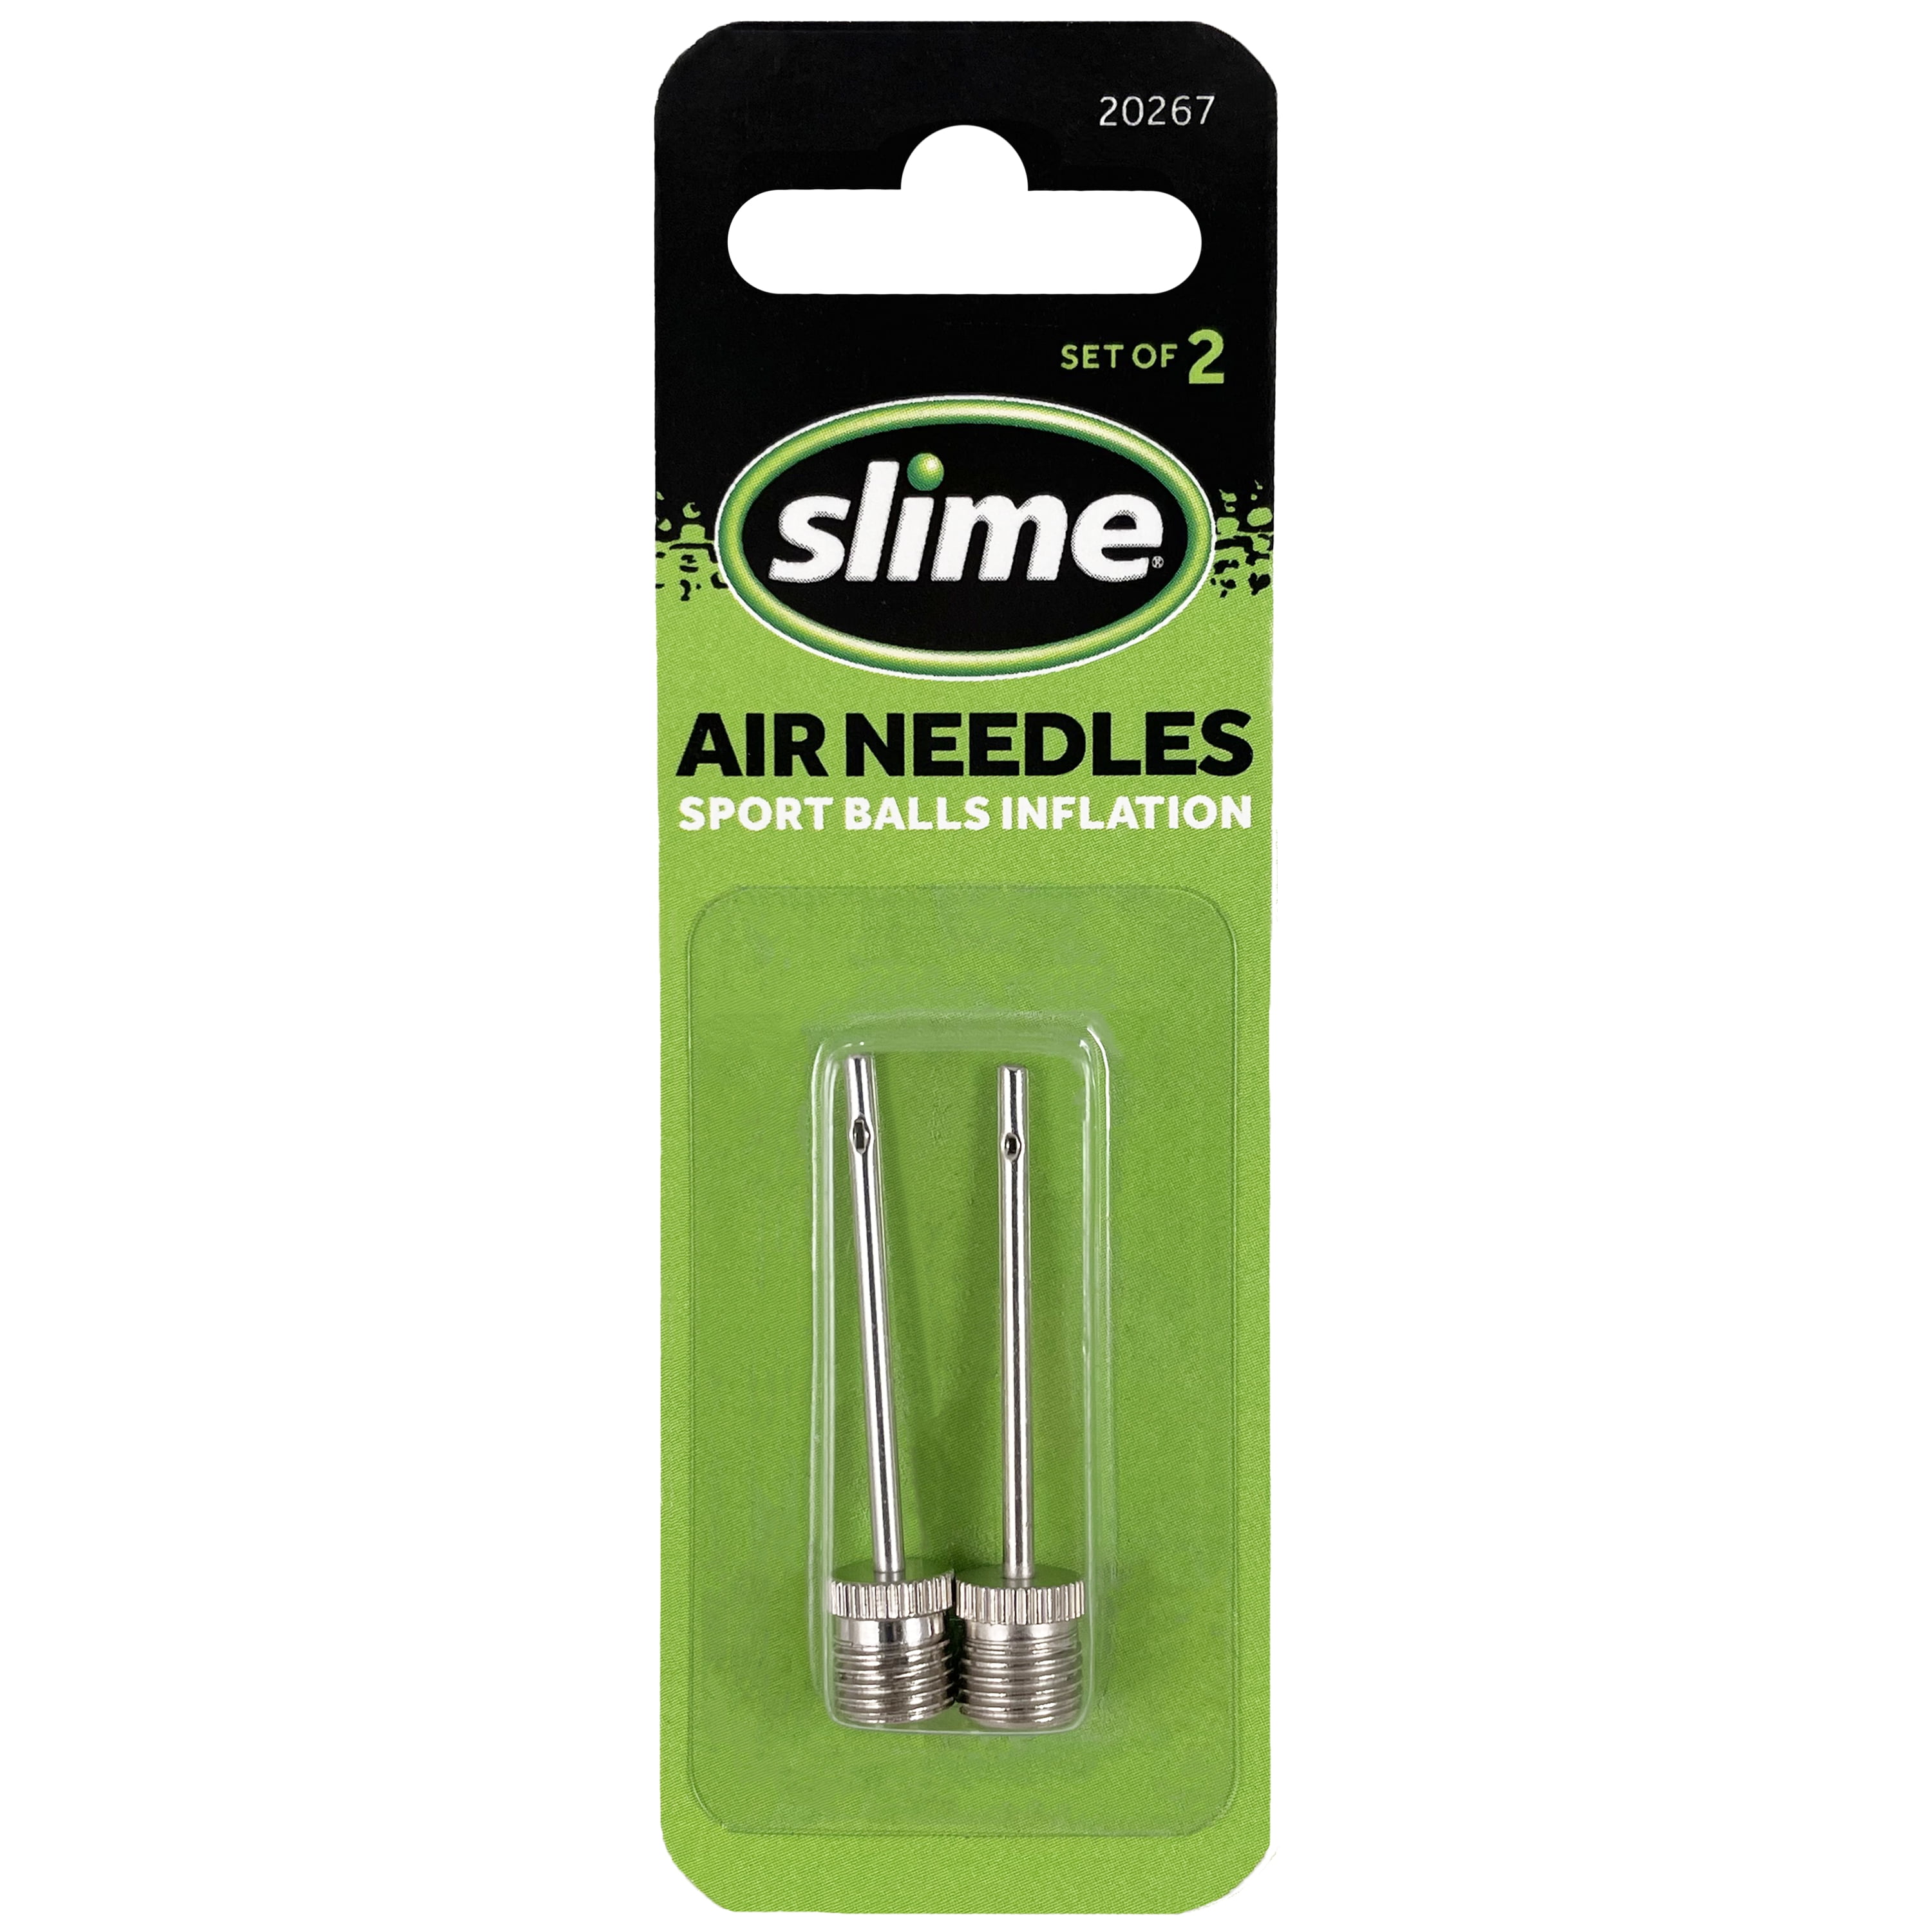 Slime Bicycle Tire Air Needles Plus Other Inflatables, 2 Pack - 20267